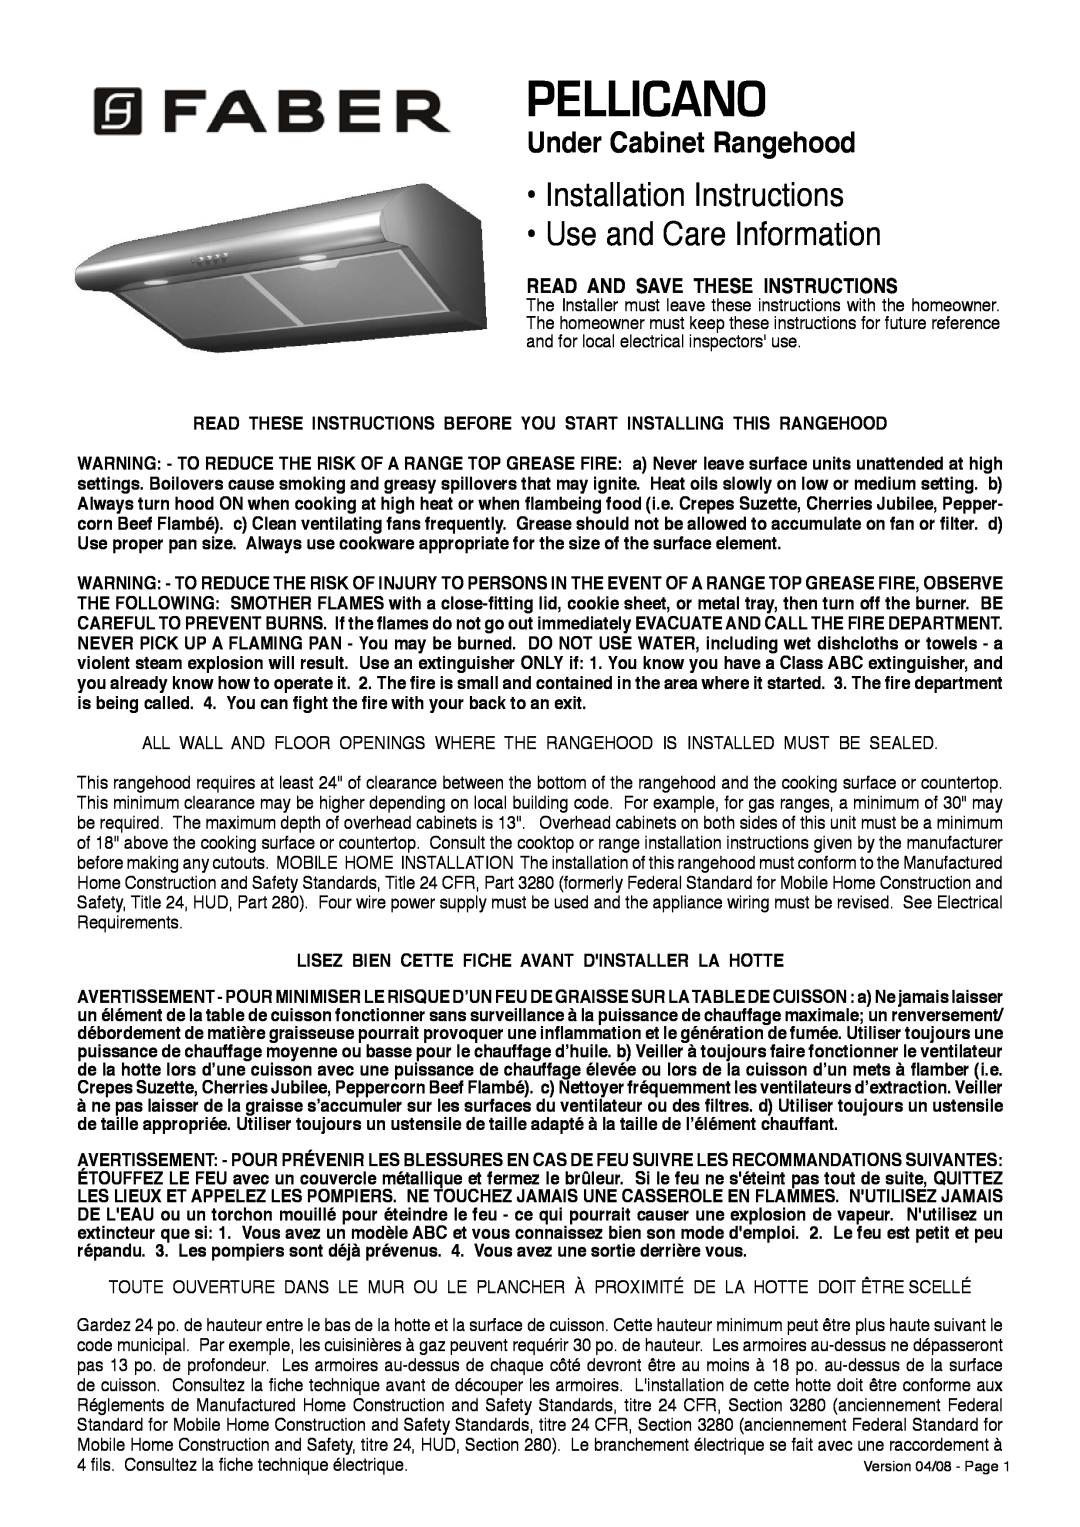 Faber installation instructions Under Cabinet Rangehood, Pellicano, Installation Instructions Use and Care Information 